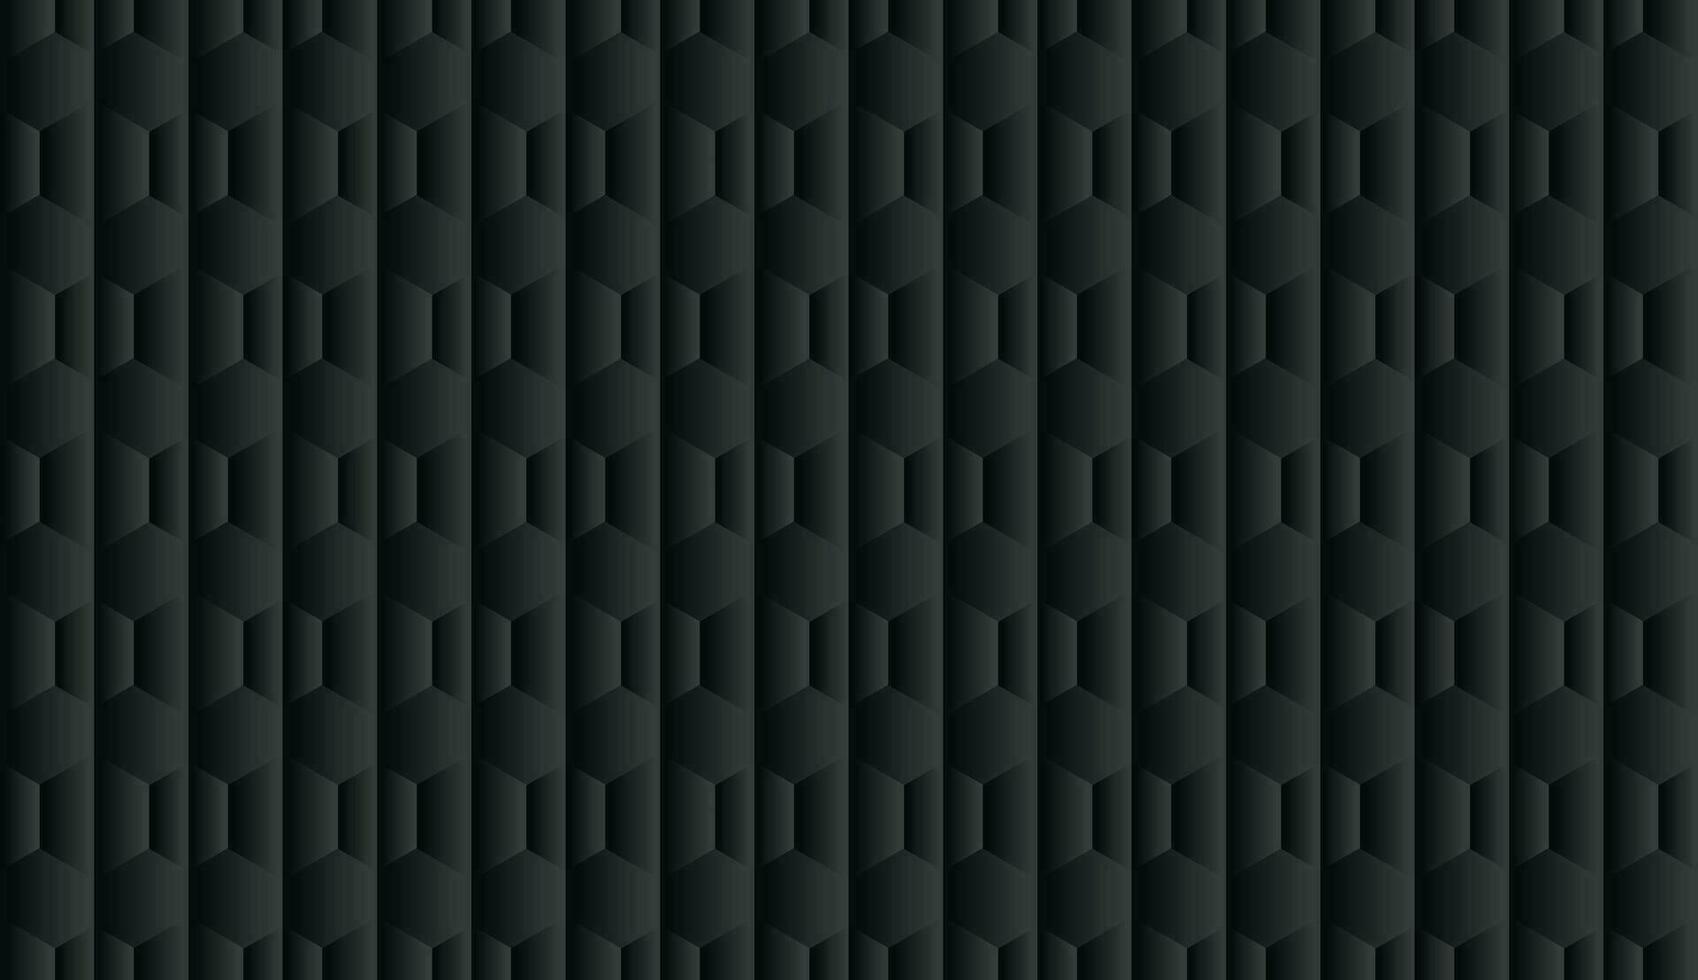 Abstract black geometric background pattern design vector